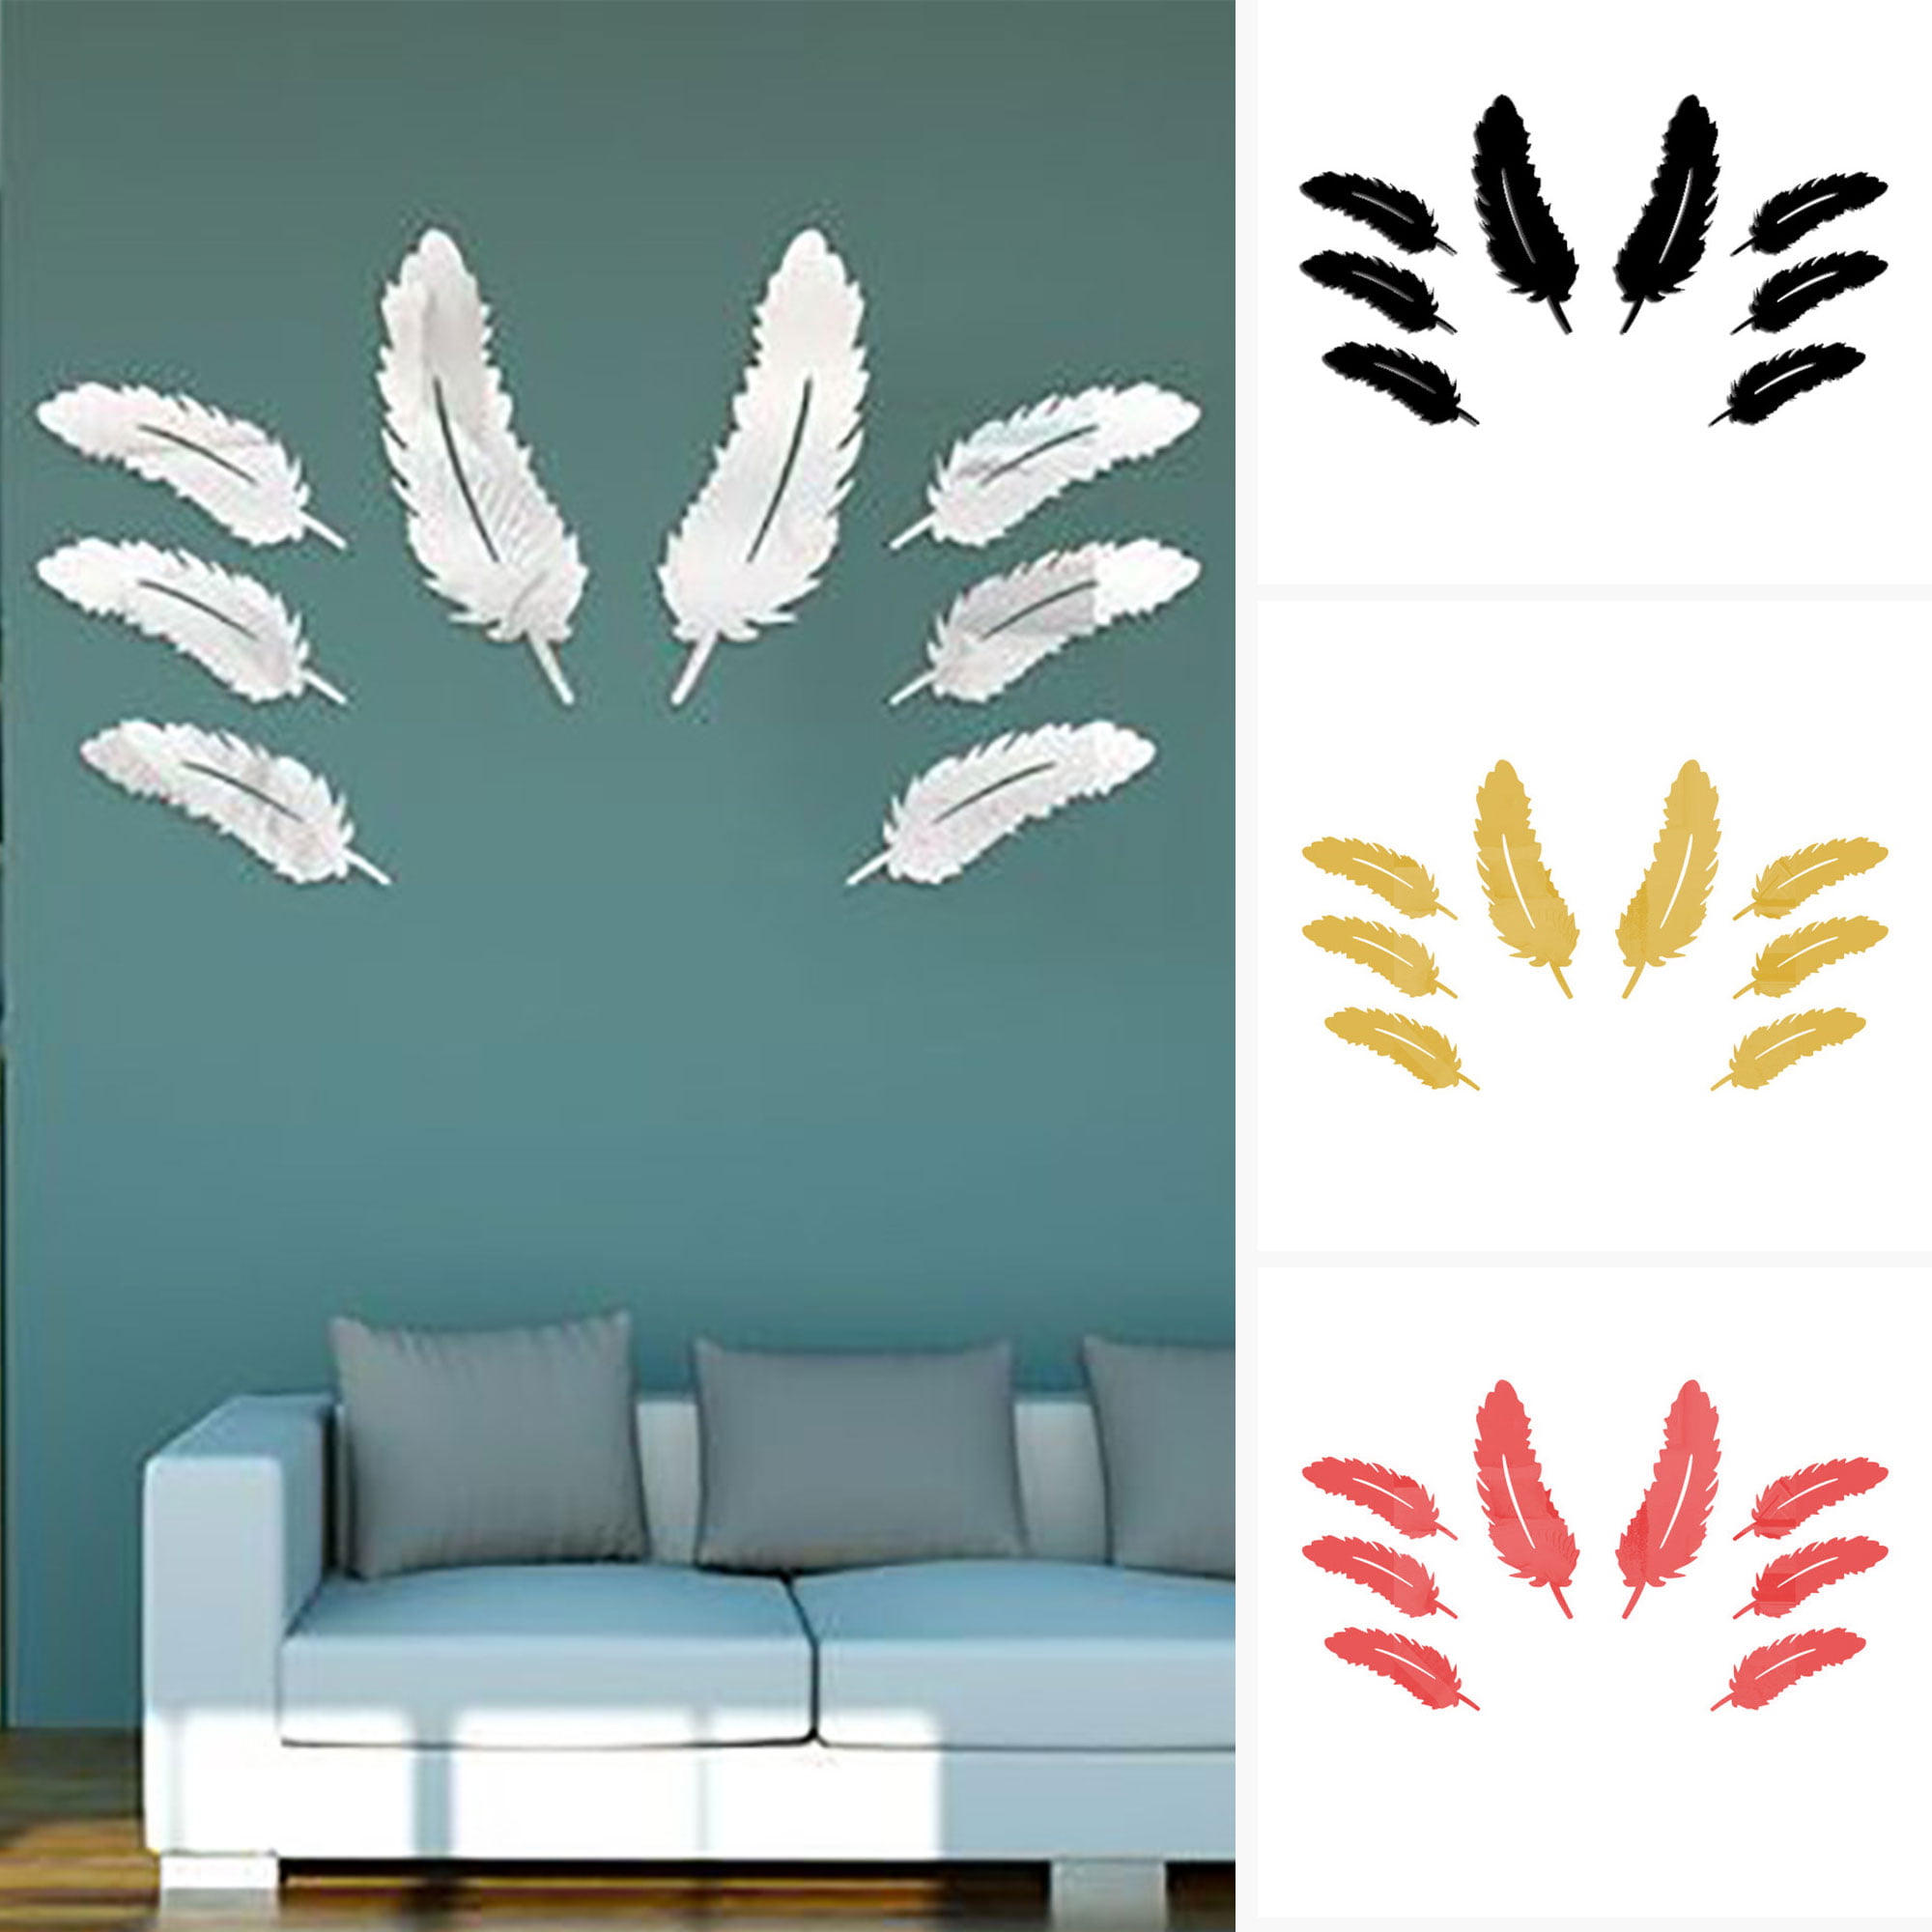 3D Mirror Wall Sticker Feather Shape Self-adhesive Home Bedroom Wall Decor US 